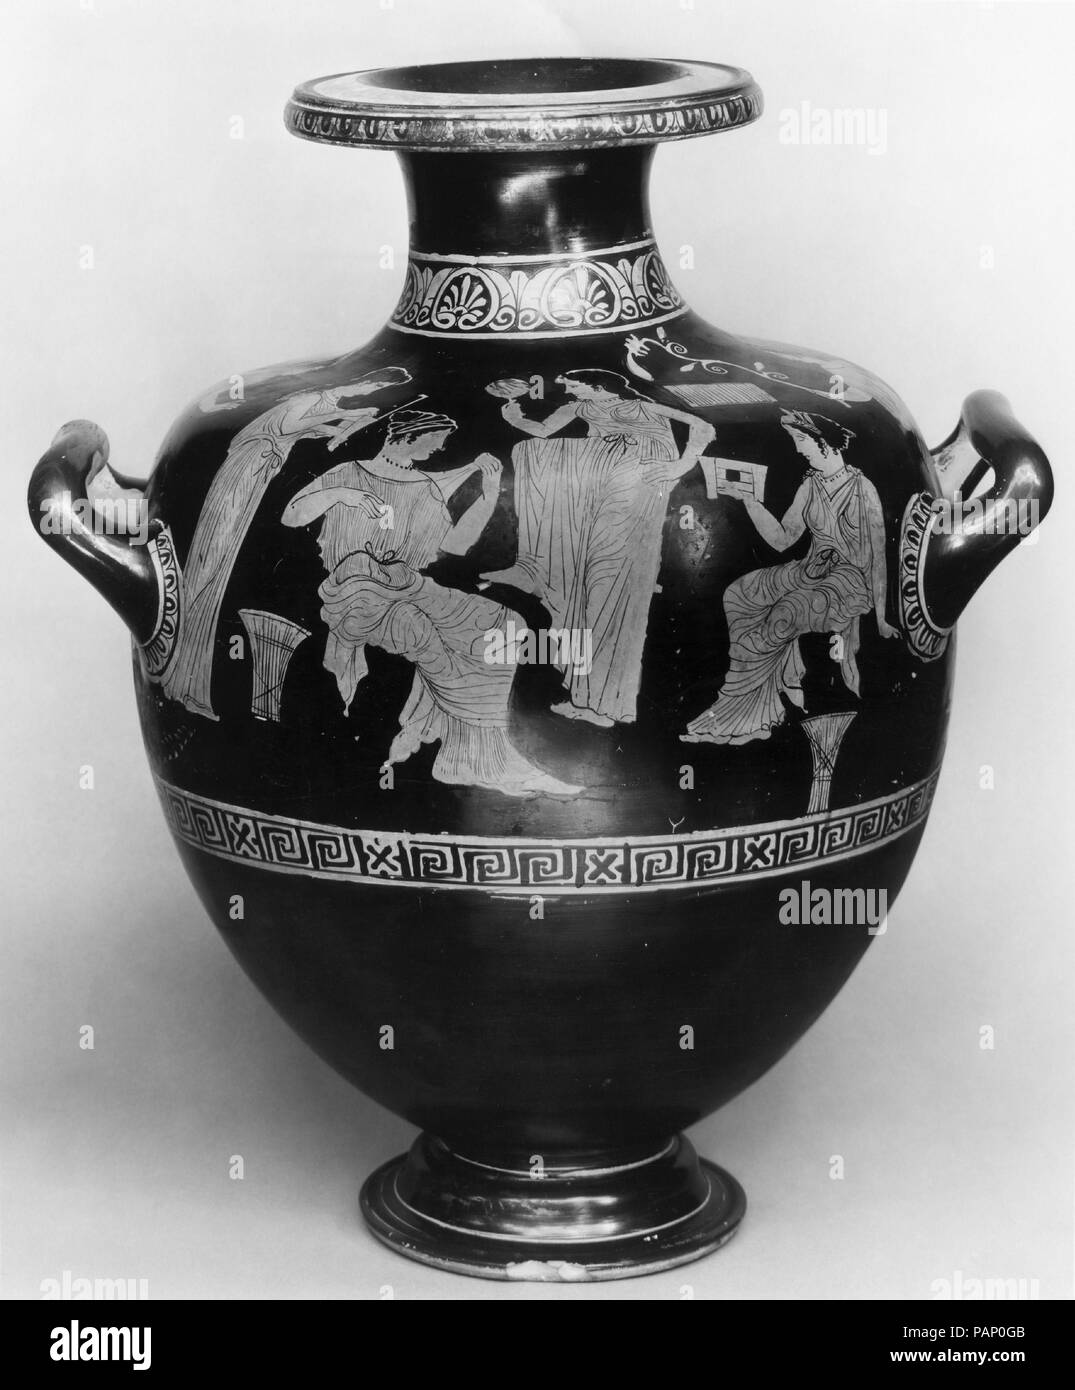 Terracotta hydria: kalpis (water jar). Culture: Greek, Attic. Dimensions: H.: 17 x 12 3/16 in. (43.2 x 31 cm). Date: ca. 420-410 B.C..  Women outdoors  The setting is indicated by the uneven terrain and the wisps of plant life growing around the figures. Otherwise, the iconography would be that of women in a domestic interior. The ladies are finely dressed and embellished with jewelry. They are shown with their caskets, wool baskets, and a mirror. Museum: Metropolitan Museum of Art, New York, USA. Stock Photo